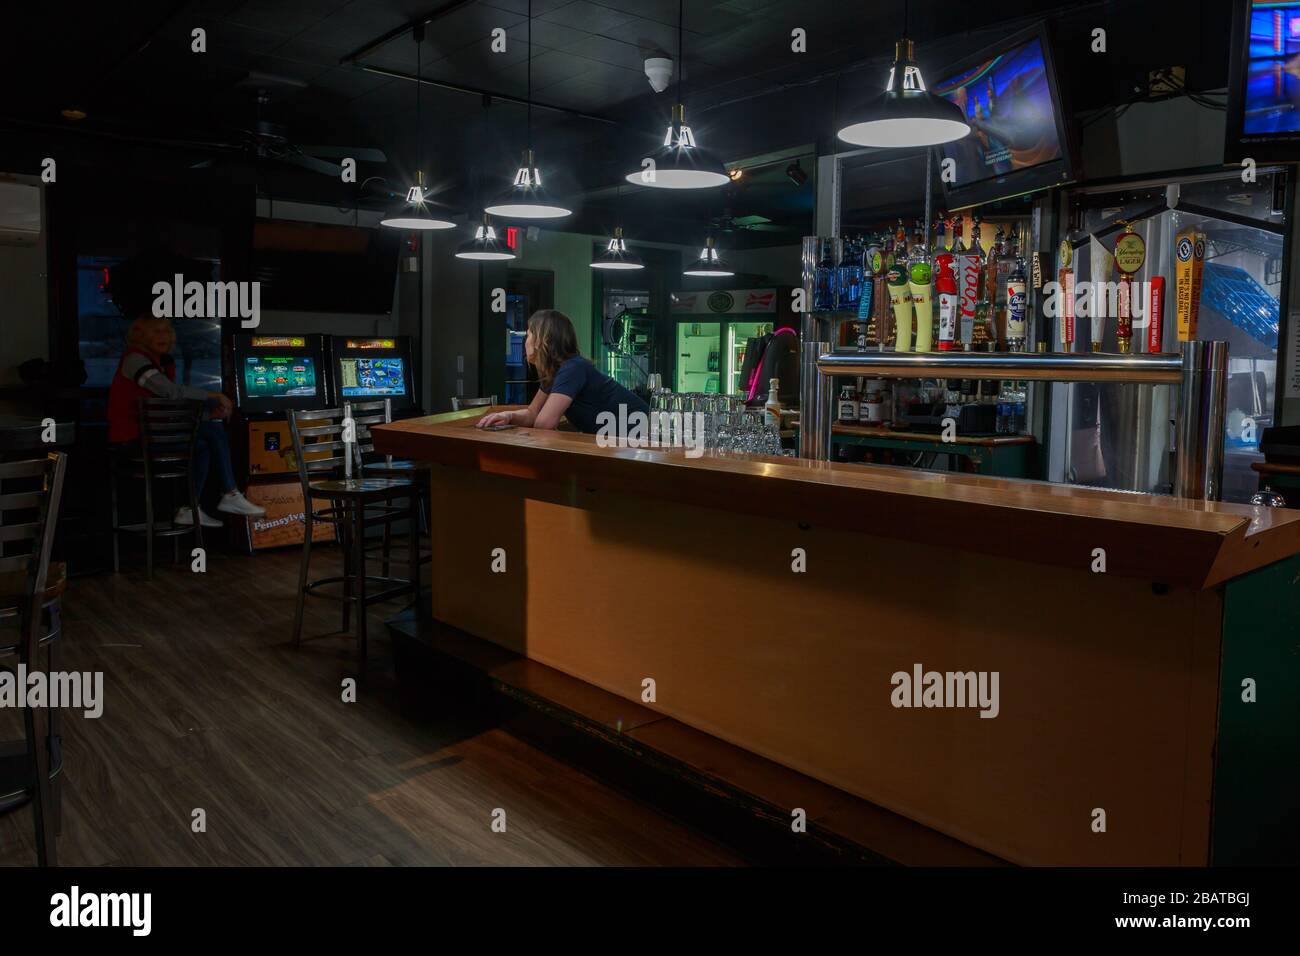 Coronavirus COVID-19, Empty small local bar and restaurant, March 27, 2020, open for beer and take-out only. Stock Photo